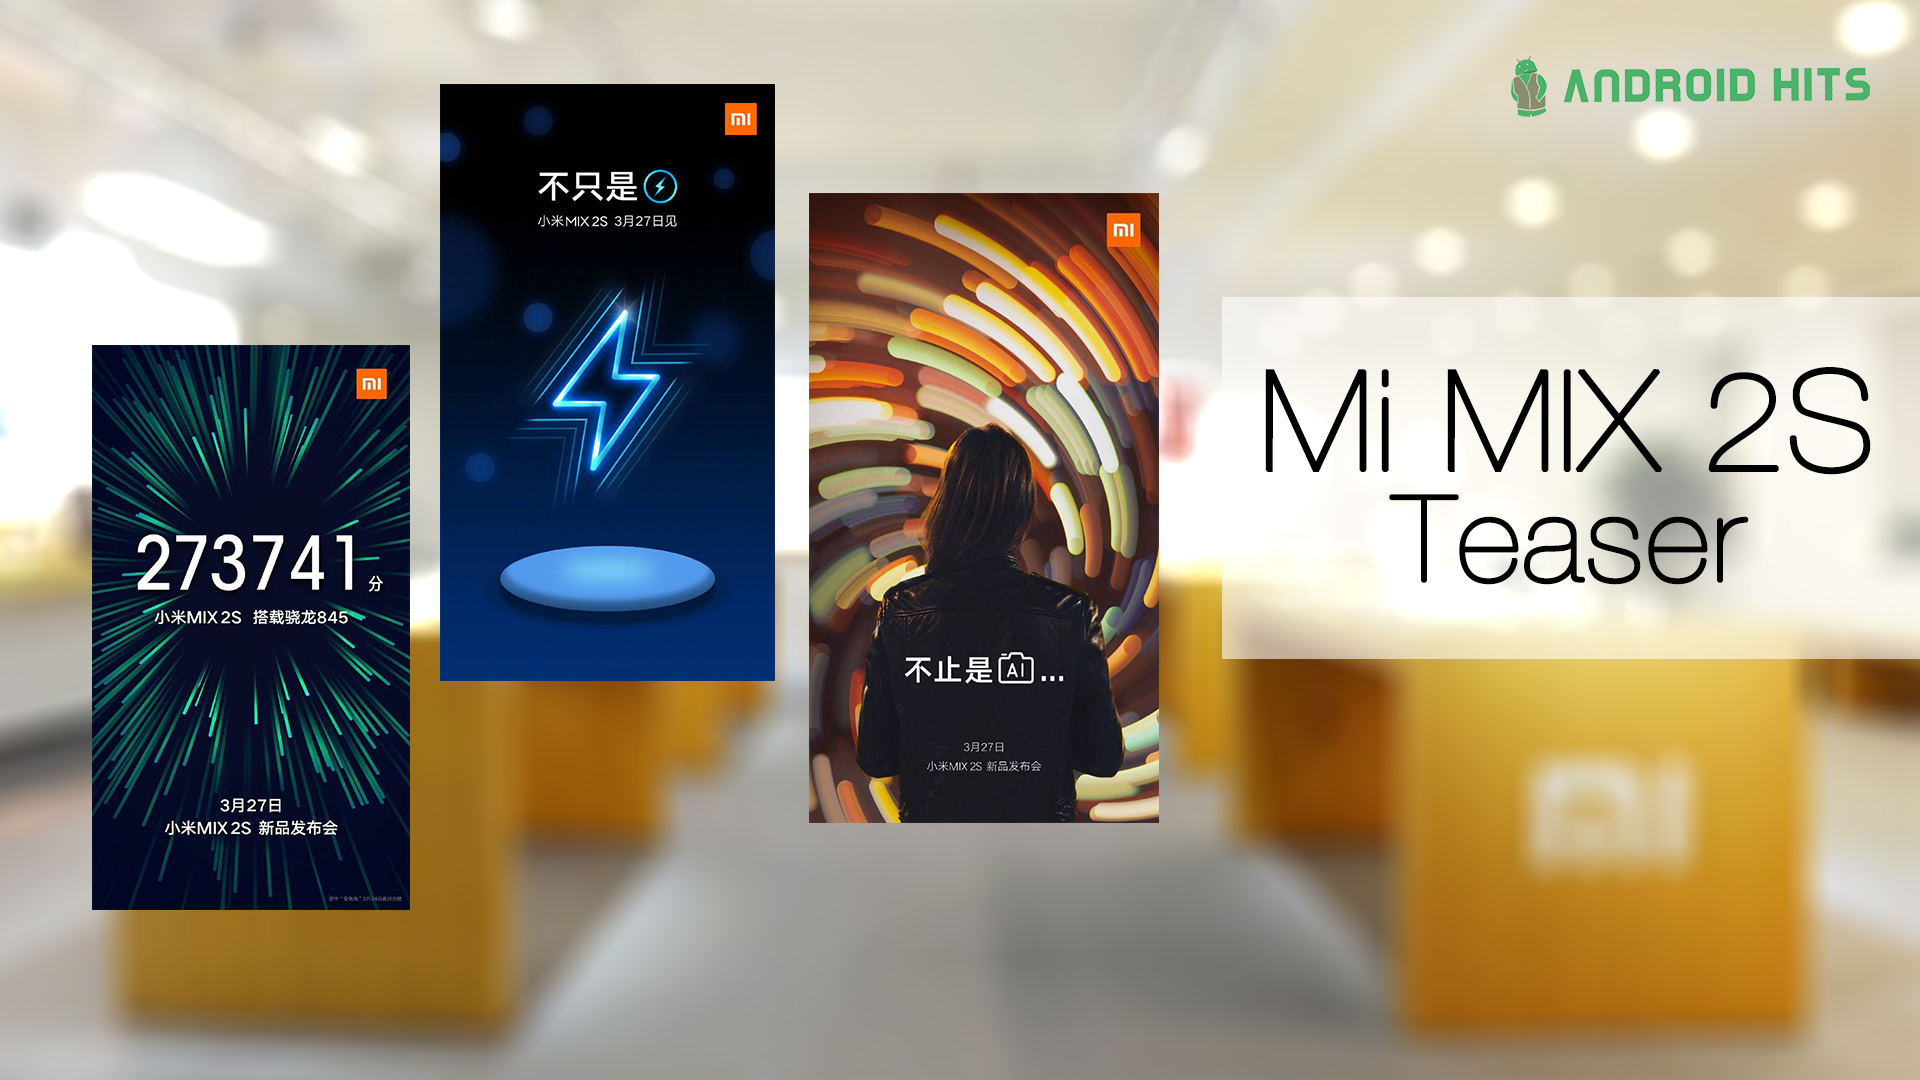 Xiaomi teases Mi MIX 2S with wireless charging, AI-dual camera and Snapdragon 845 1